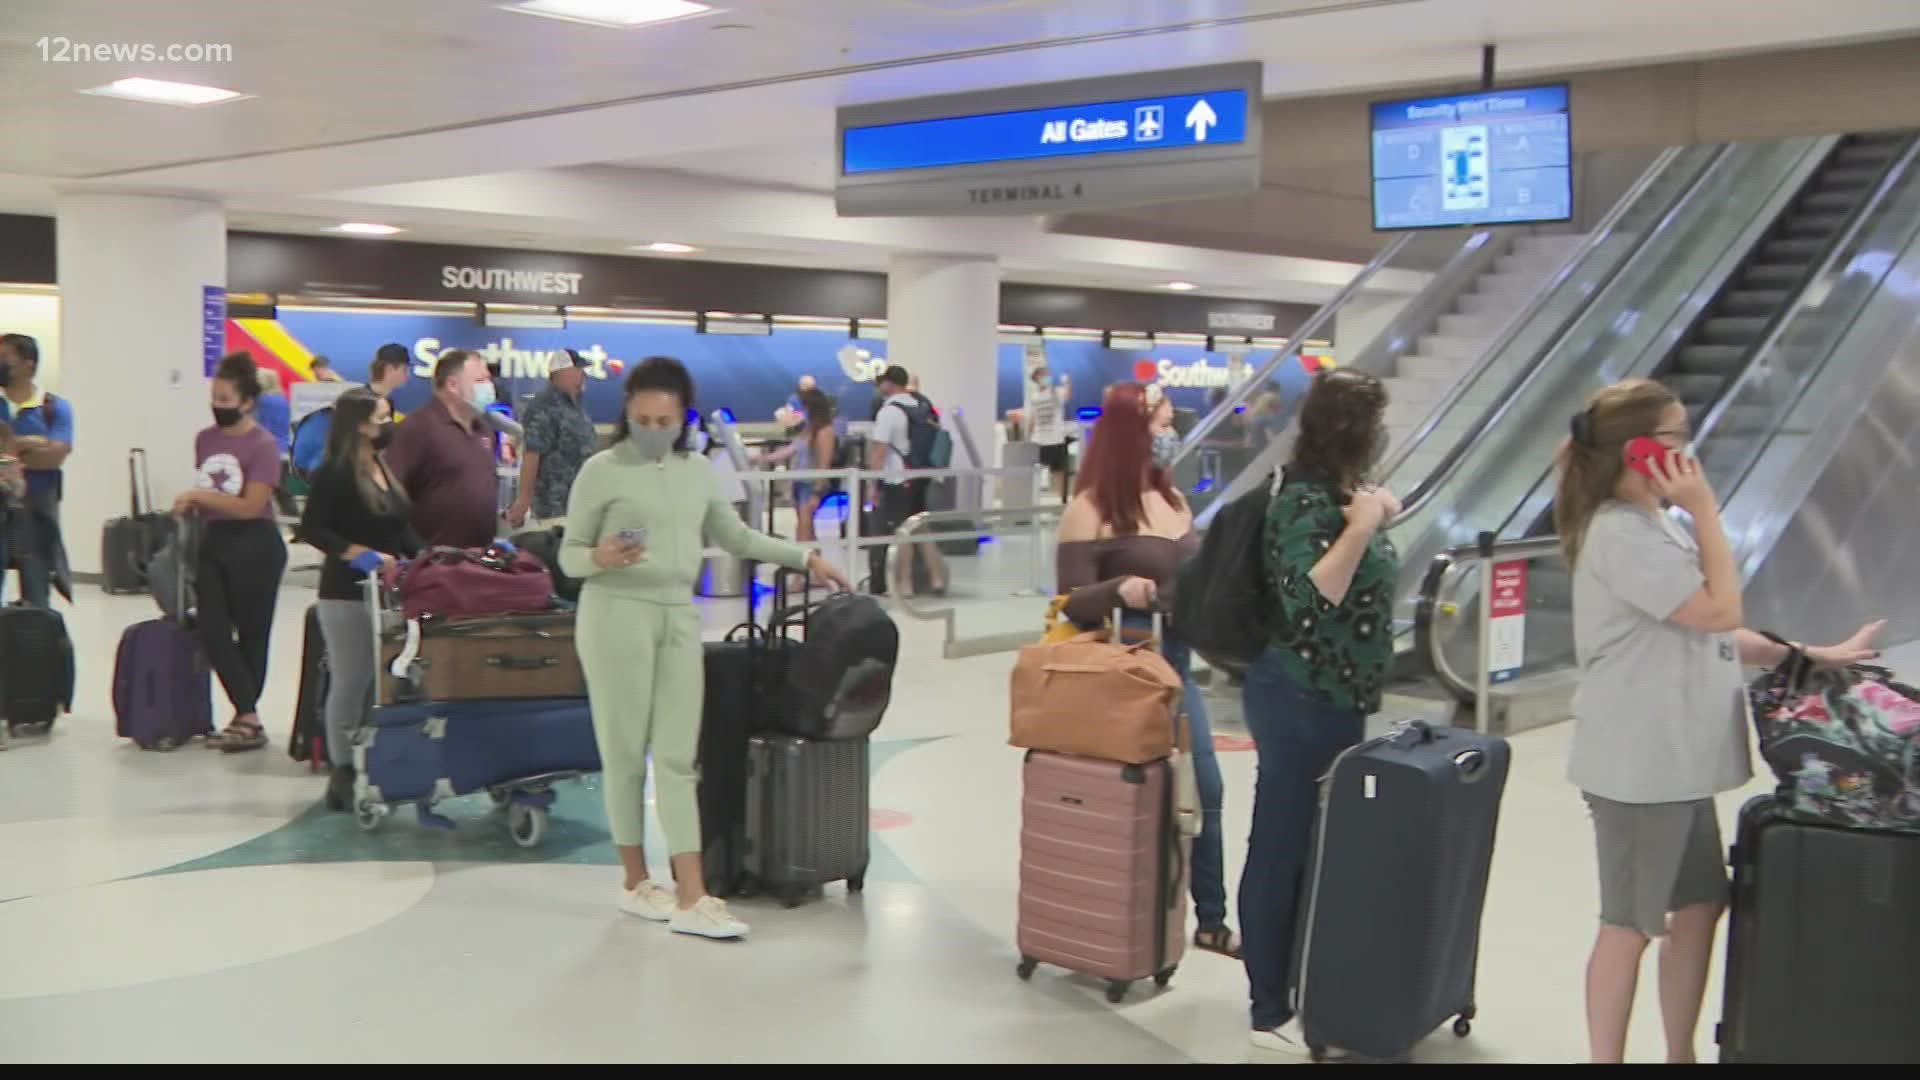 As the holiday season kicks in, air travel will be a big focus for a lot more people. Travel experts offer tips on navigating through the possible turbulence.